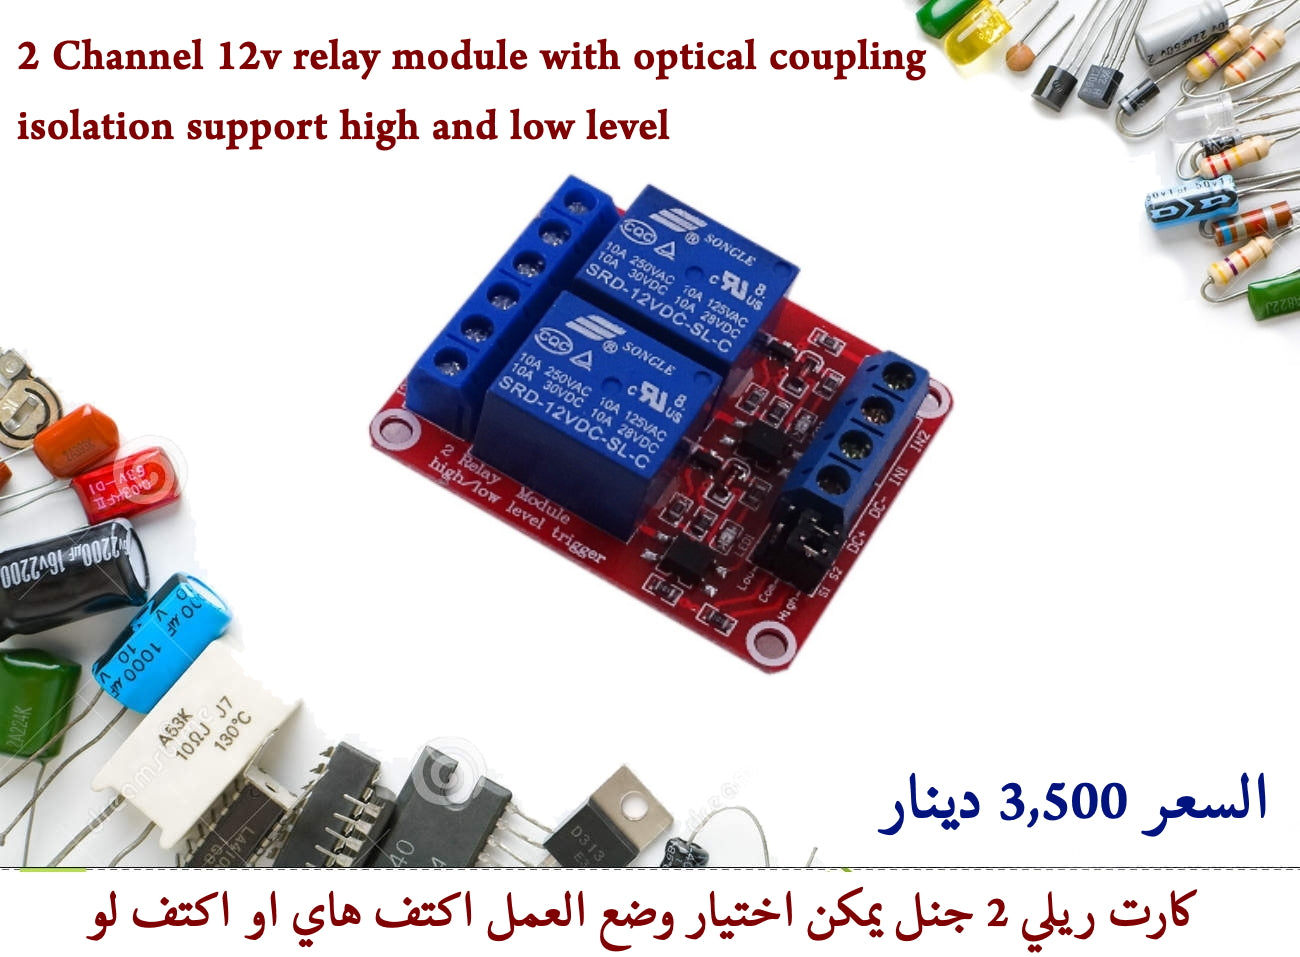 2 Channel 12v relay module with optical coupling isolation support high and low level #M5 011065